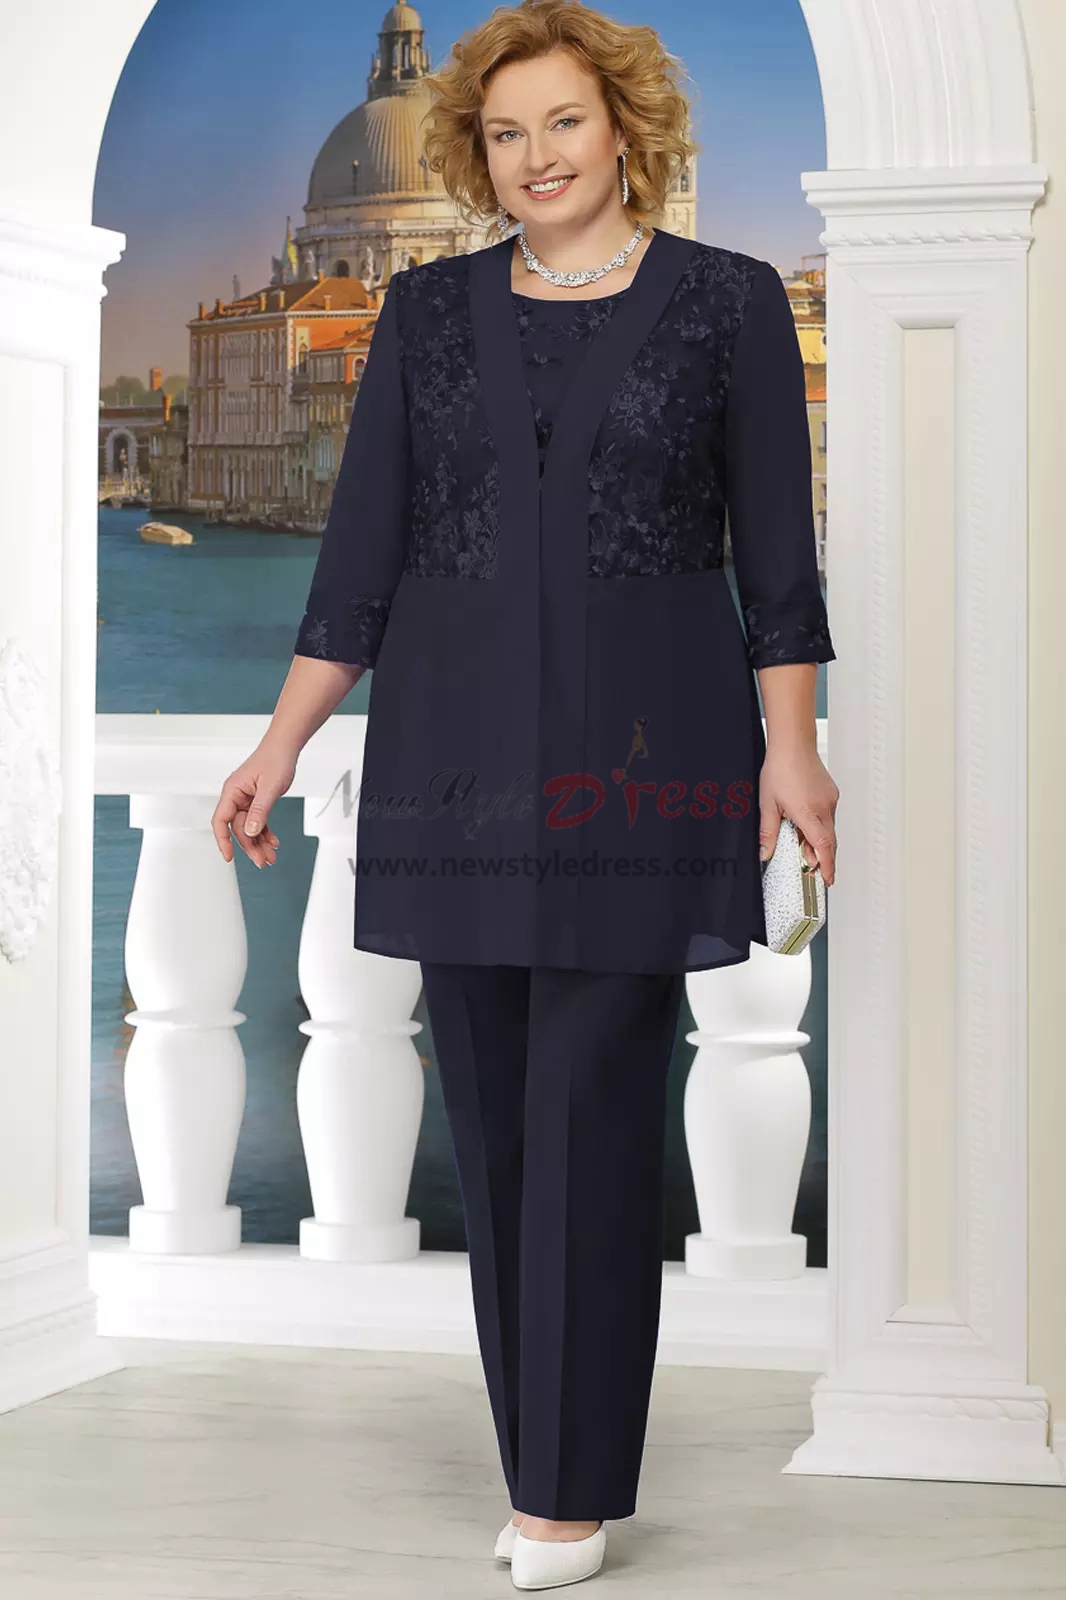 mother of the bride trouser outfits plus size